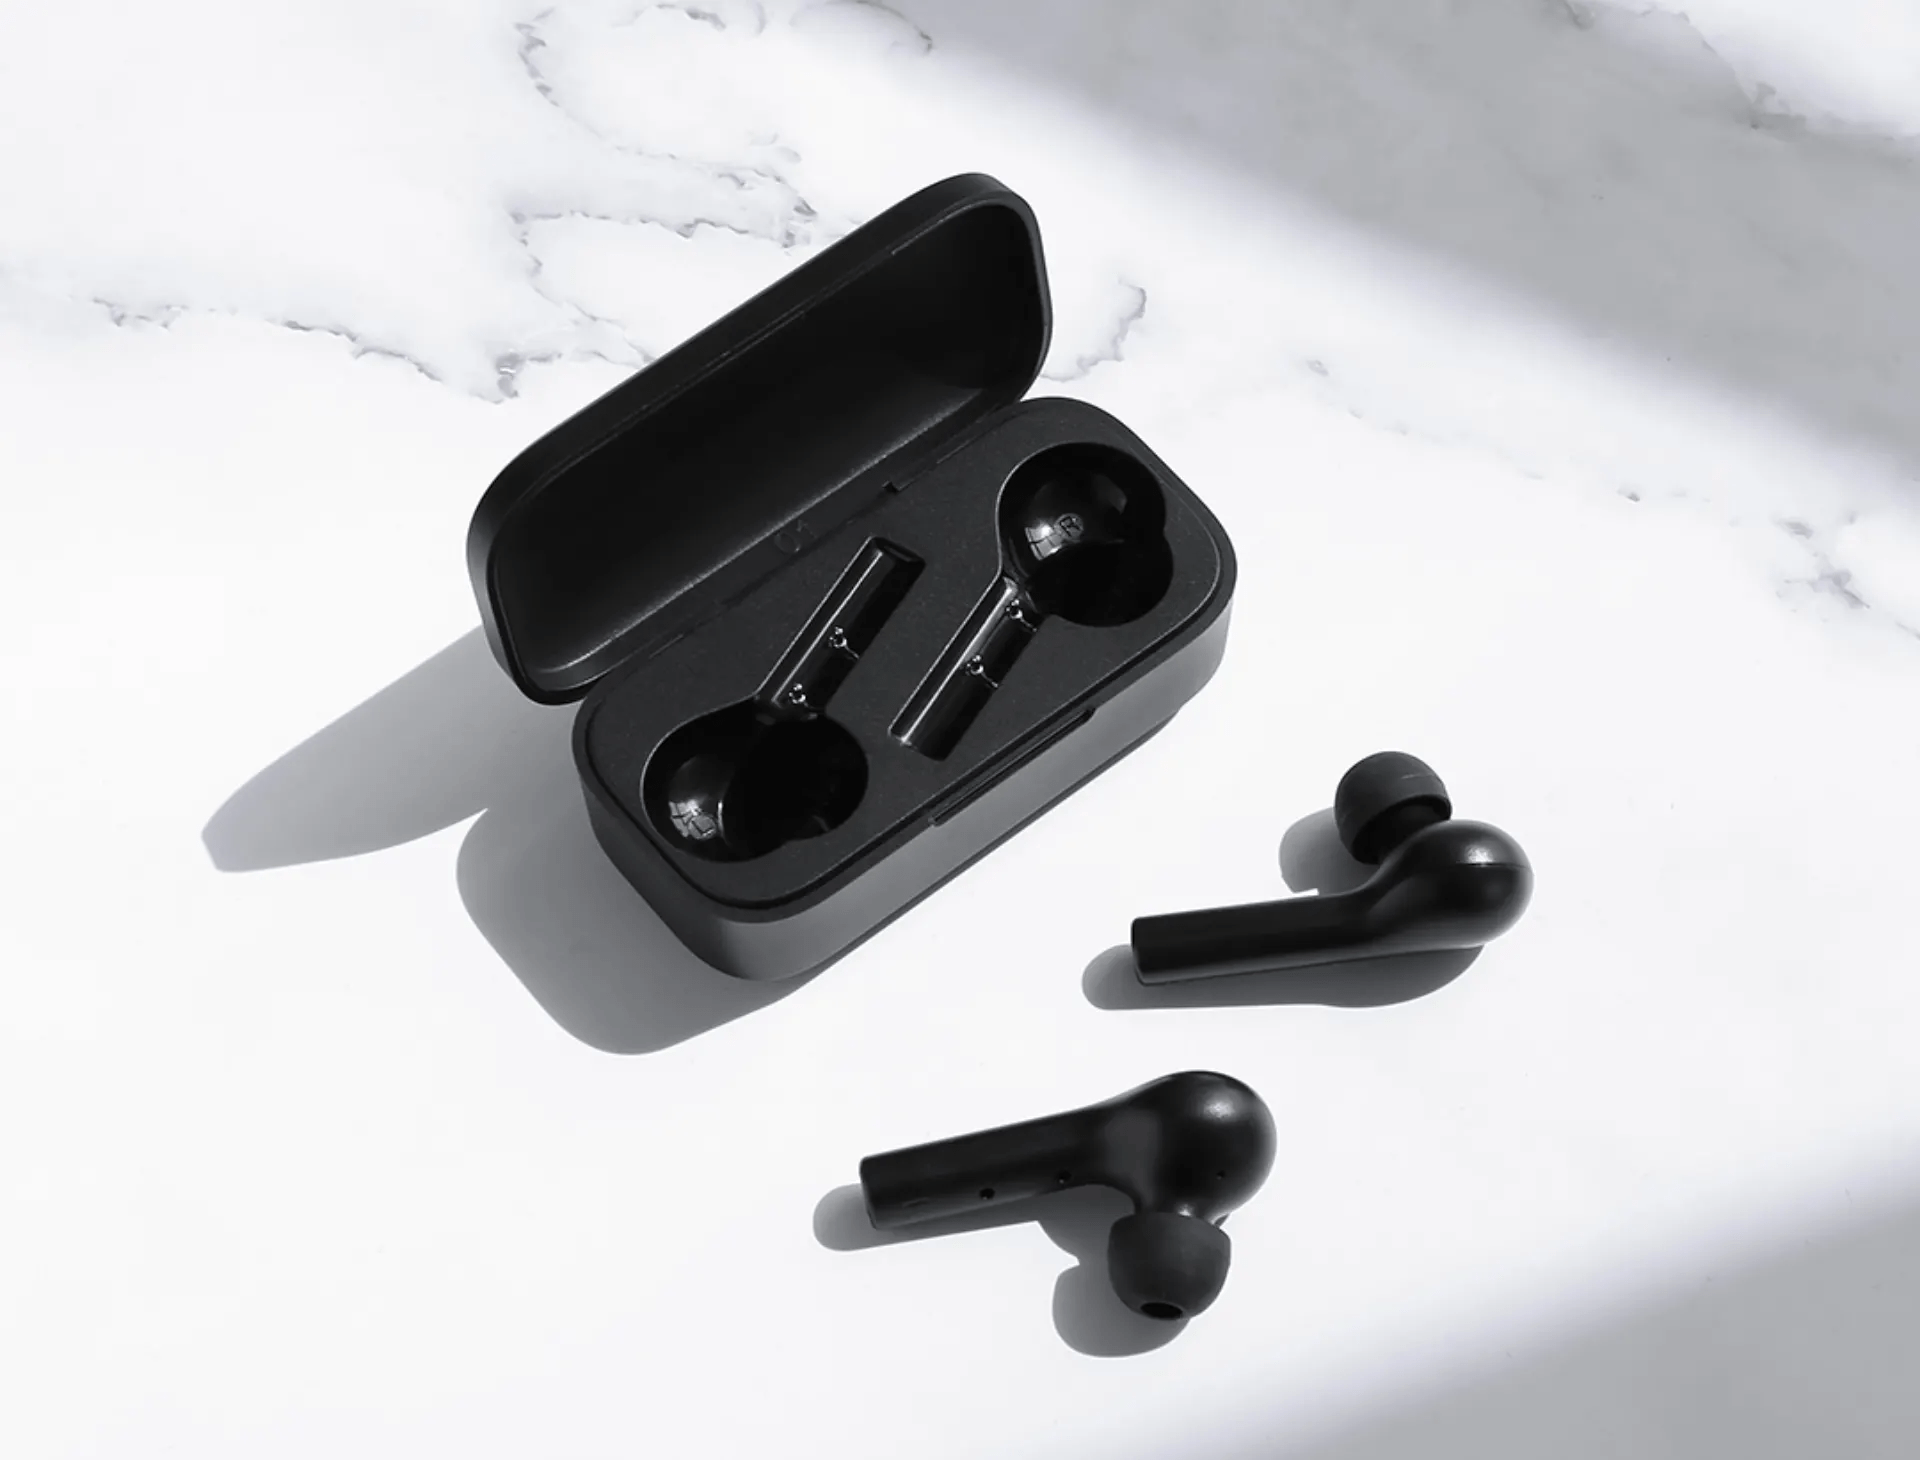 UGREEN HiTune T3 Earbuds Review: Super Comfy And –